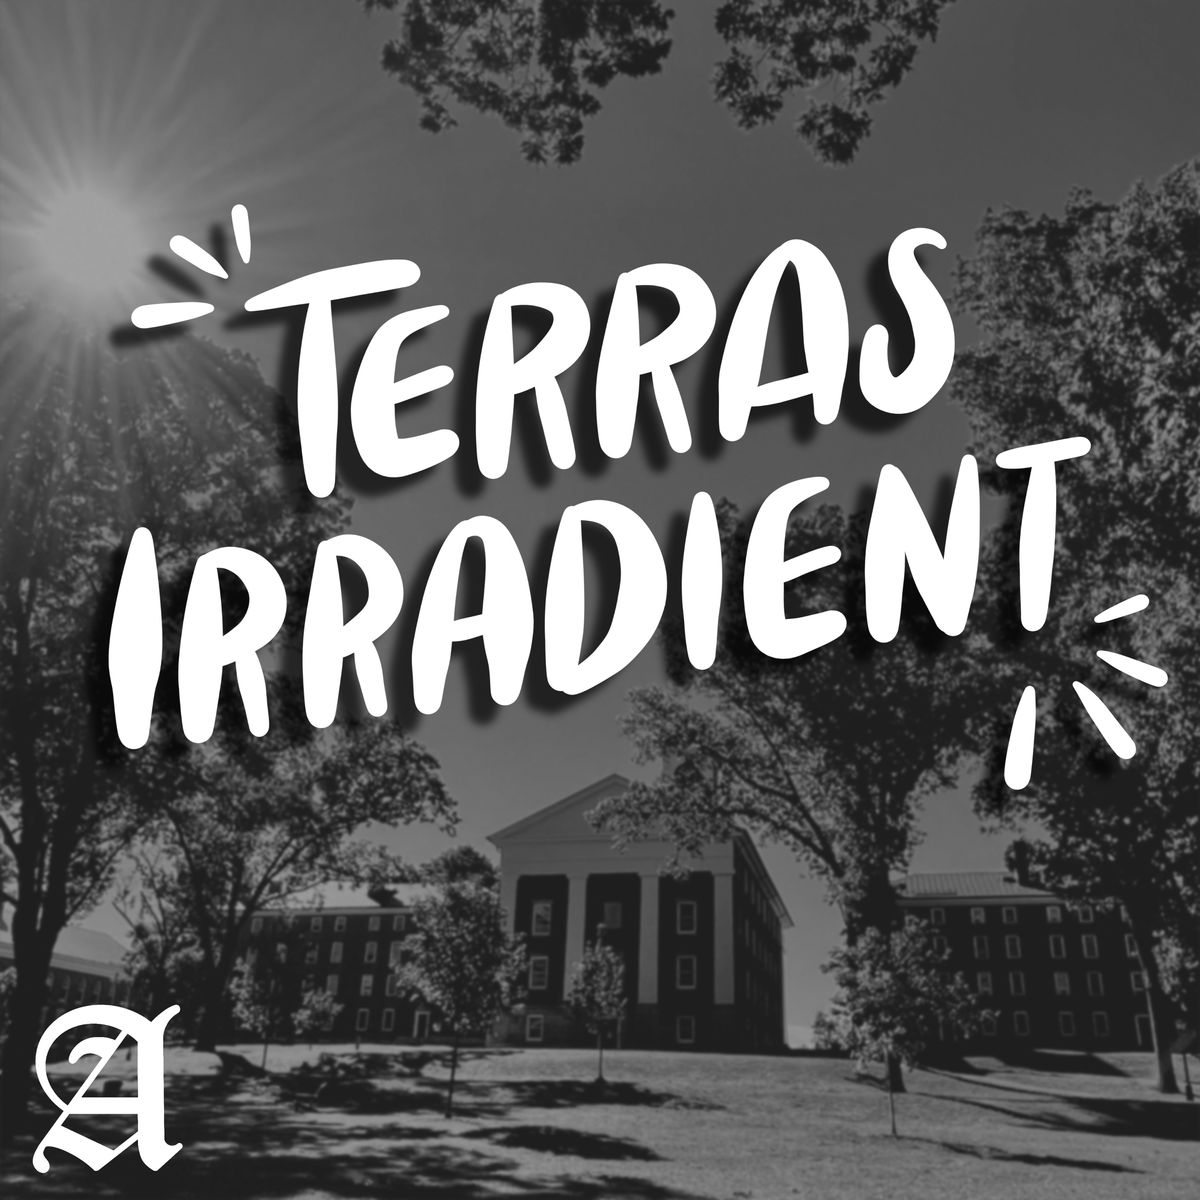 Terras Irradient: The Long Road to Unionization